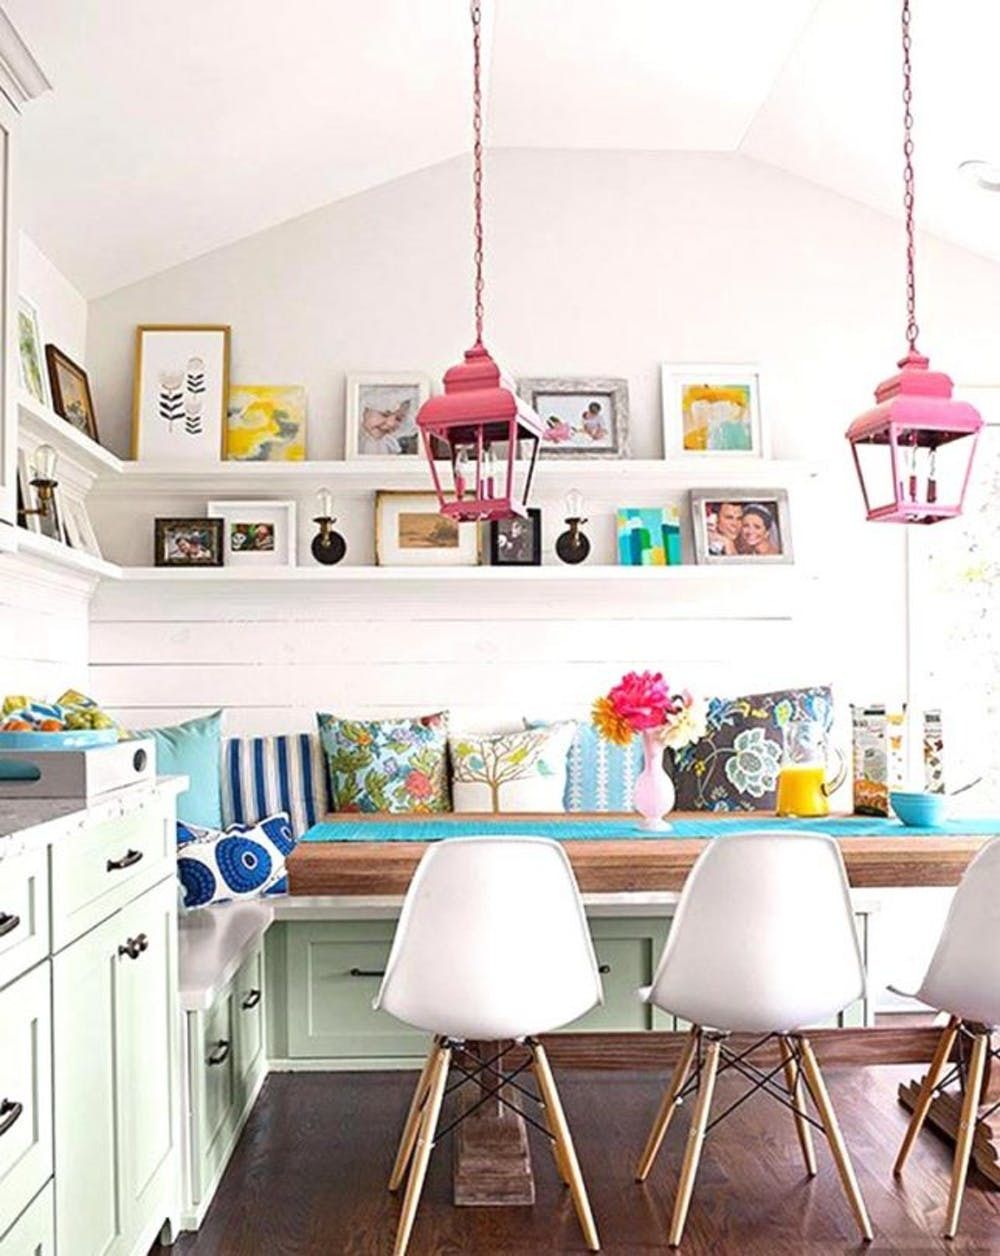 10 Kate Spade New York-Inspired Kitchens You'll Want to Do More Than Cook  In - Brit + Co